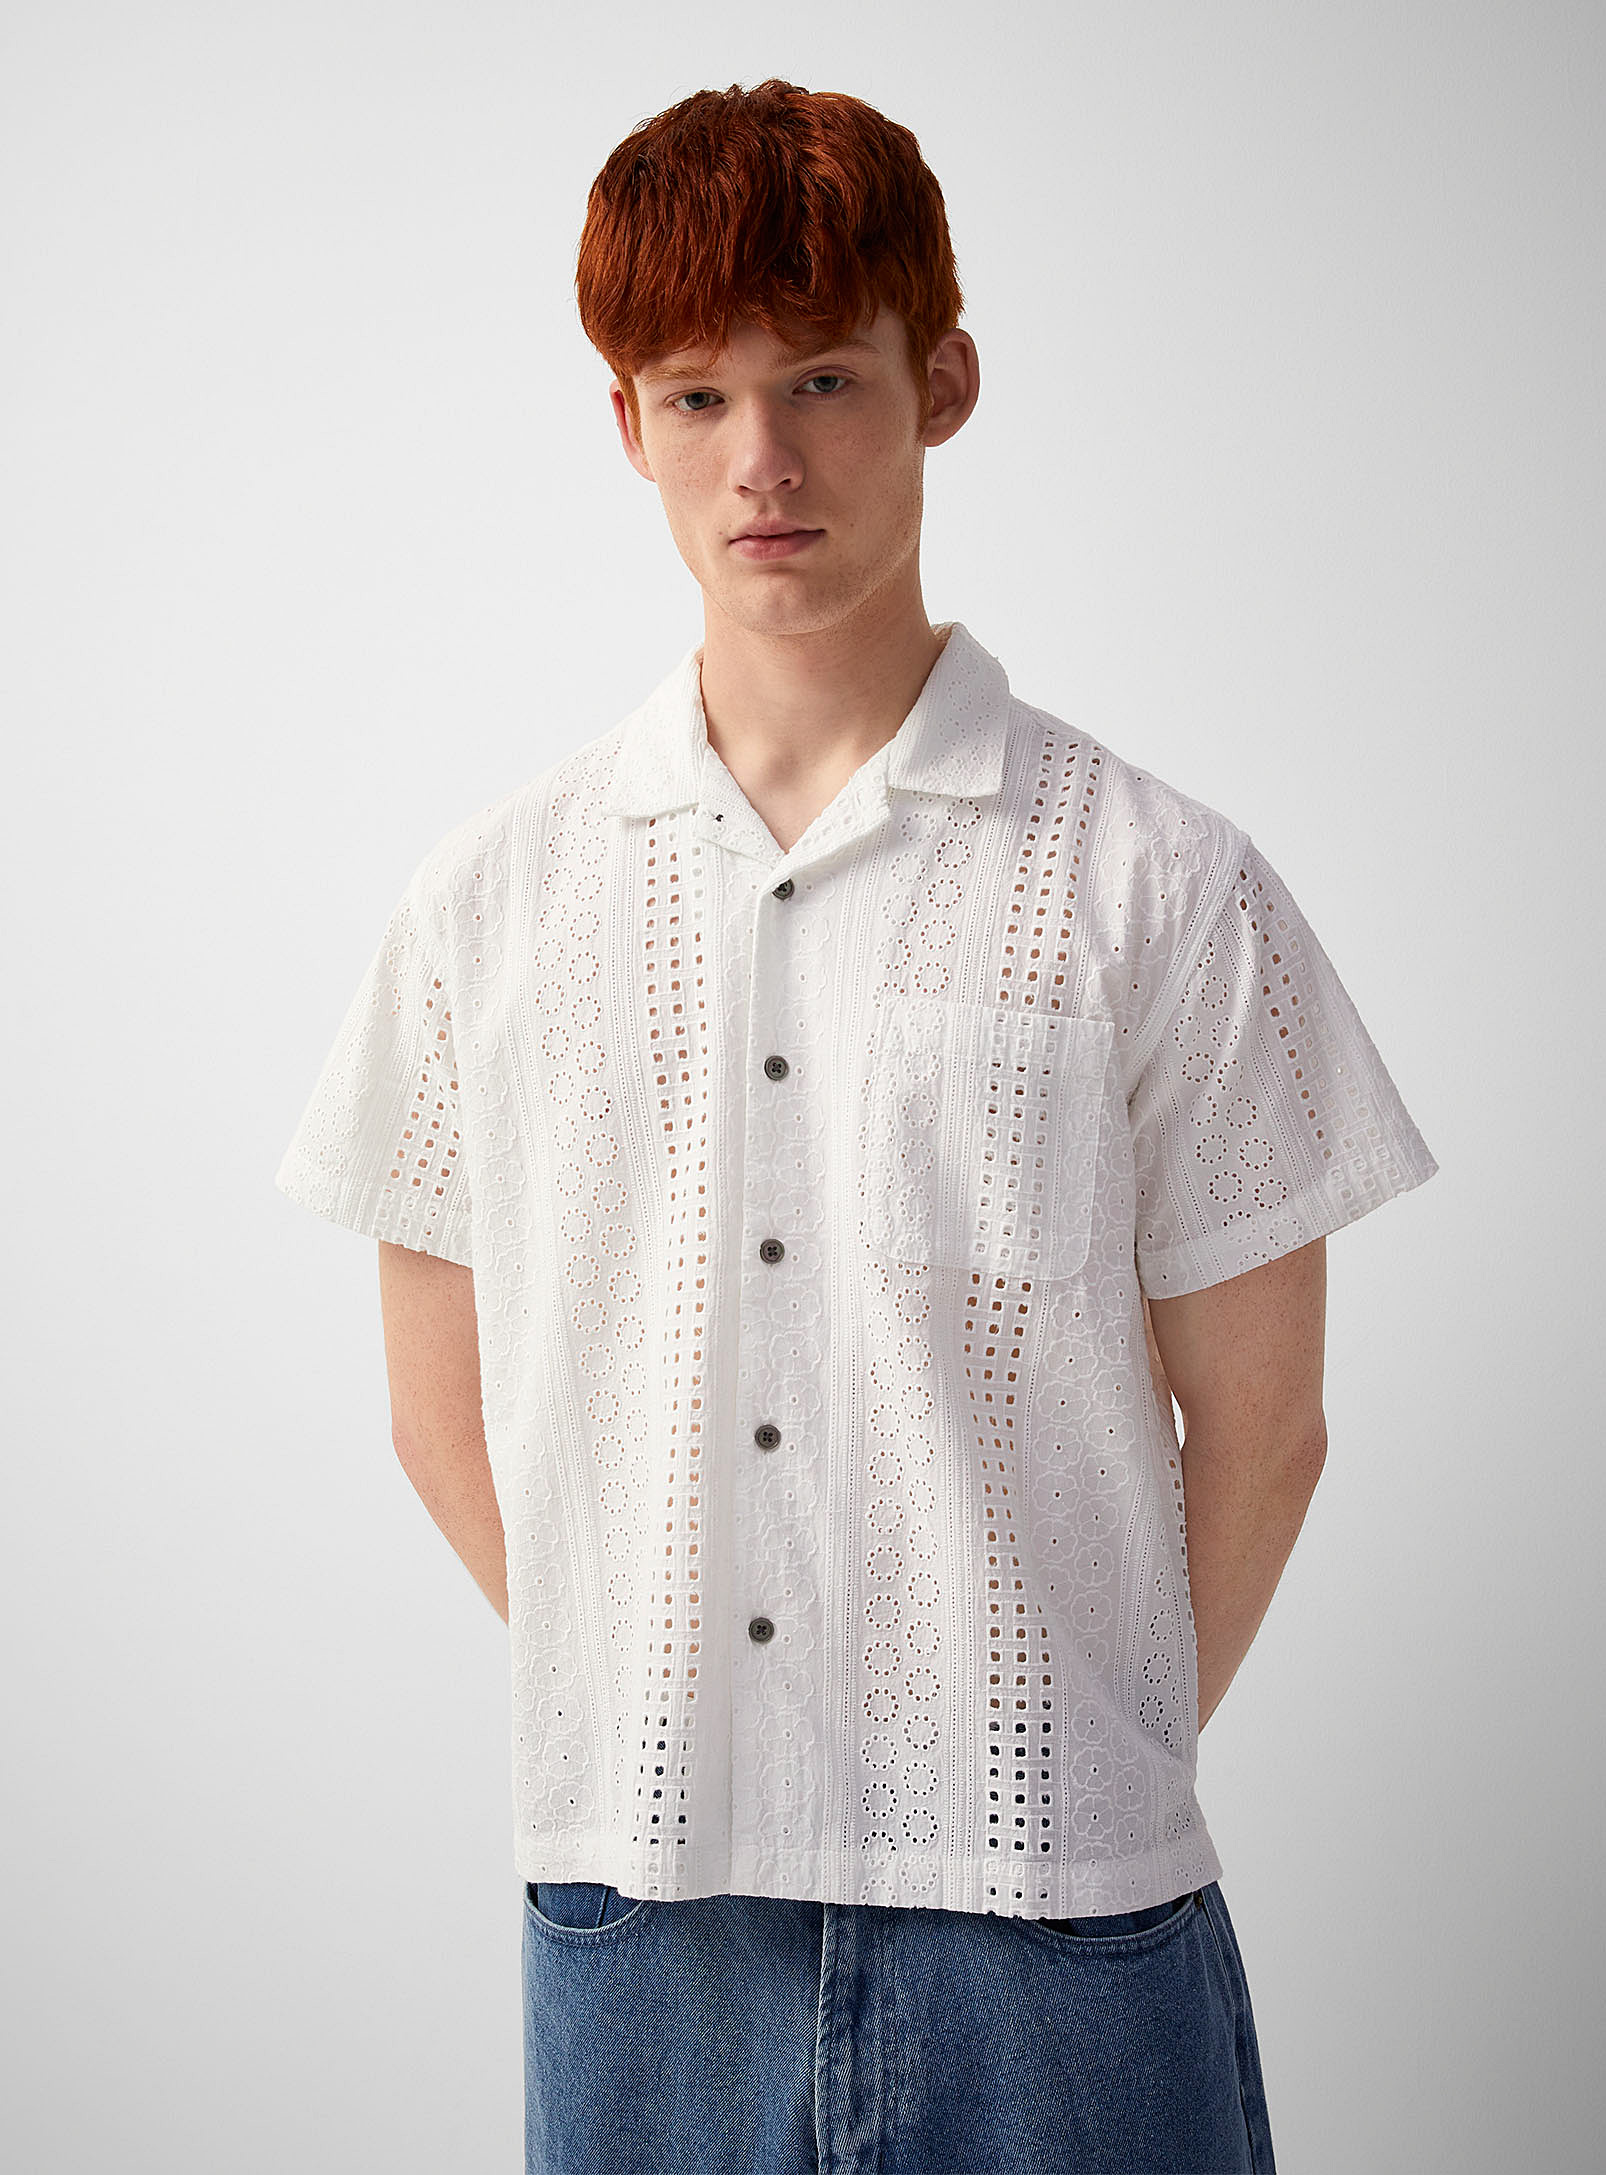 Obey - Men's Sunday broderie anglaise camp shirt